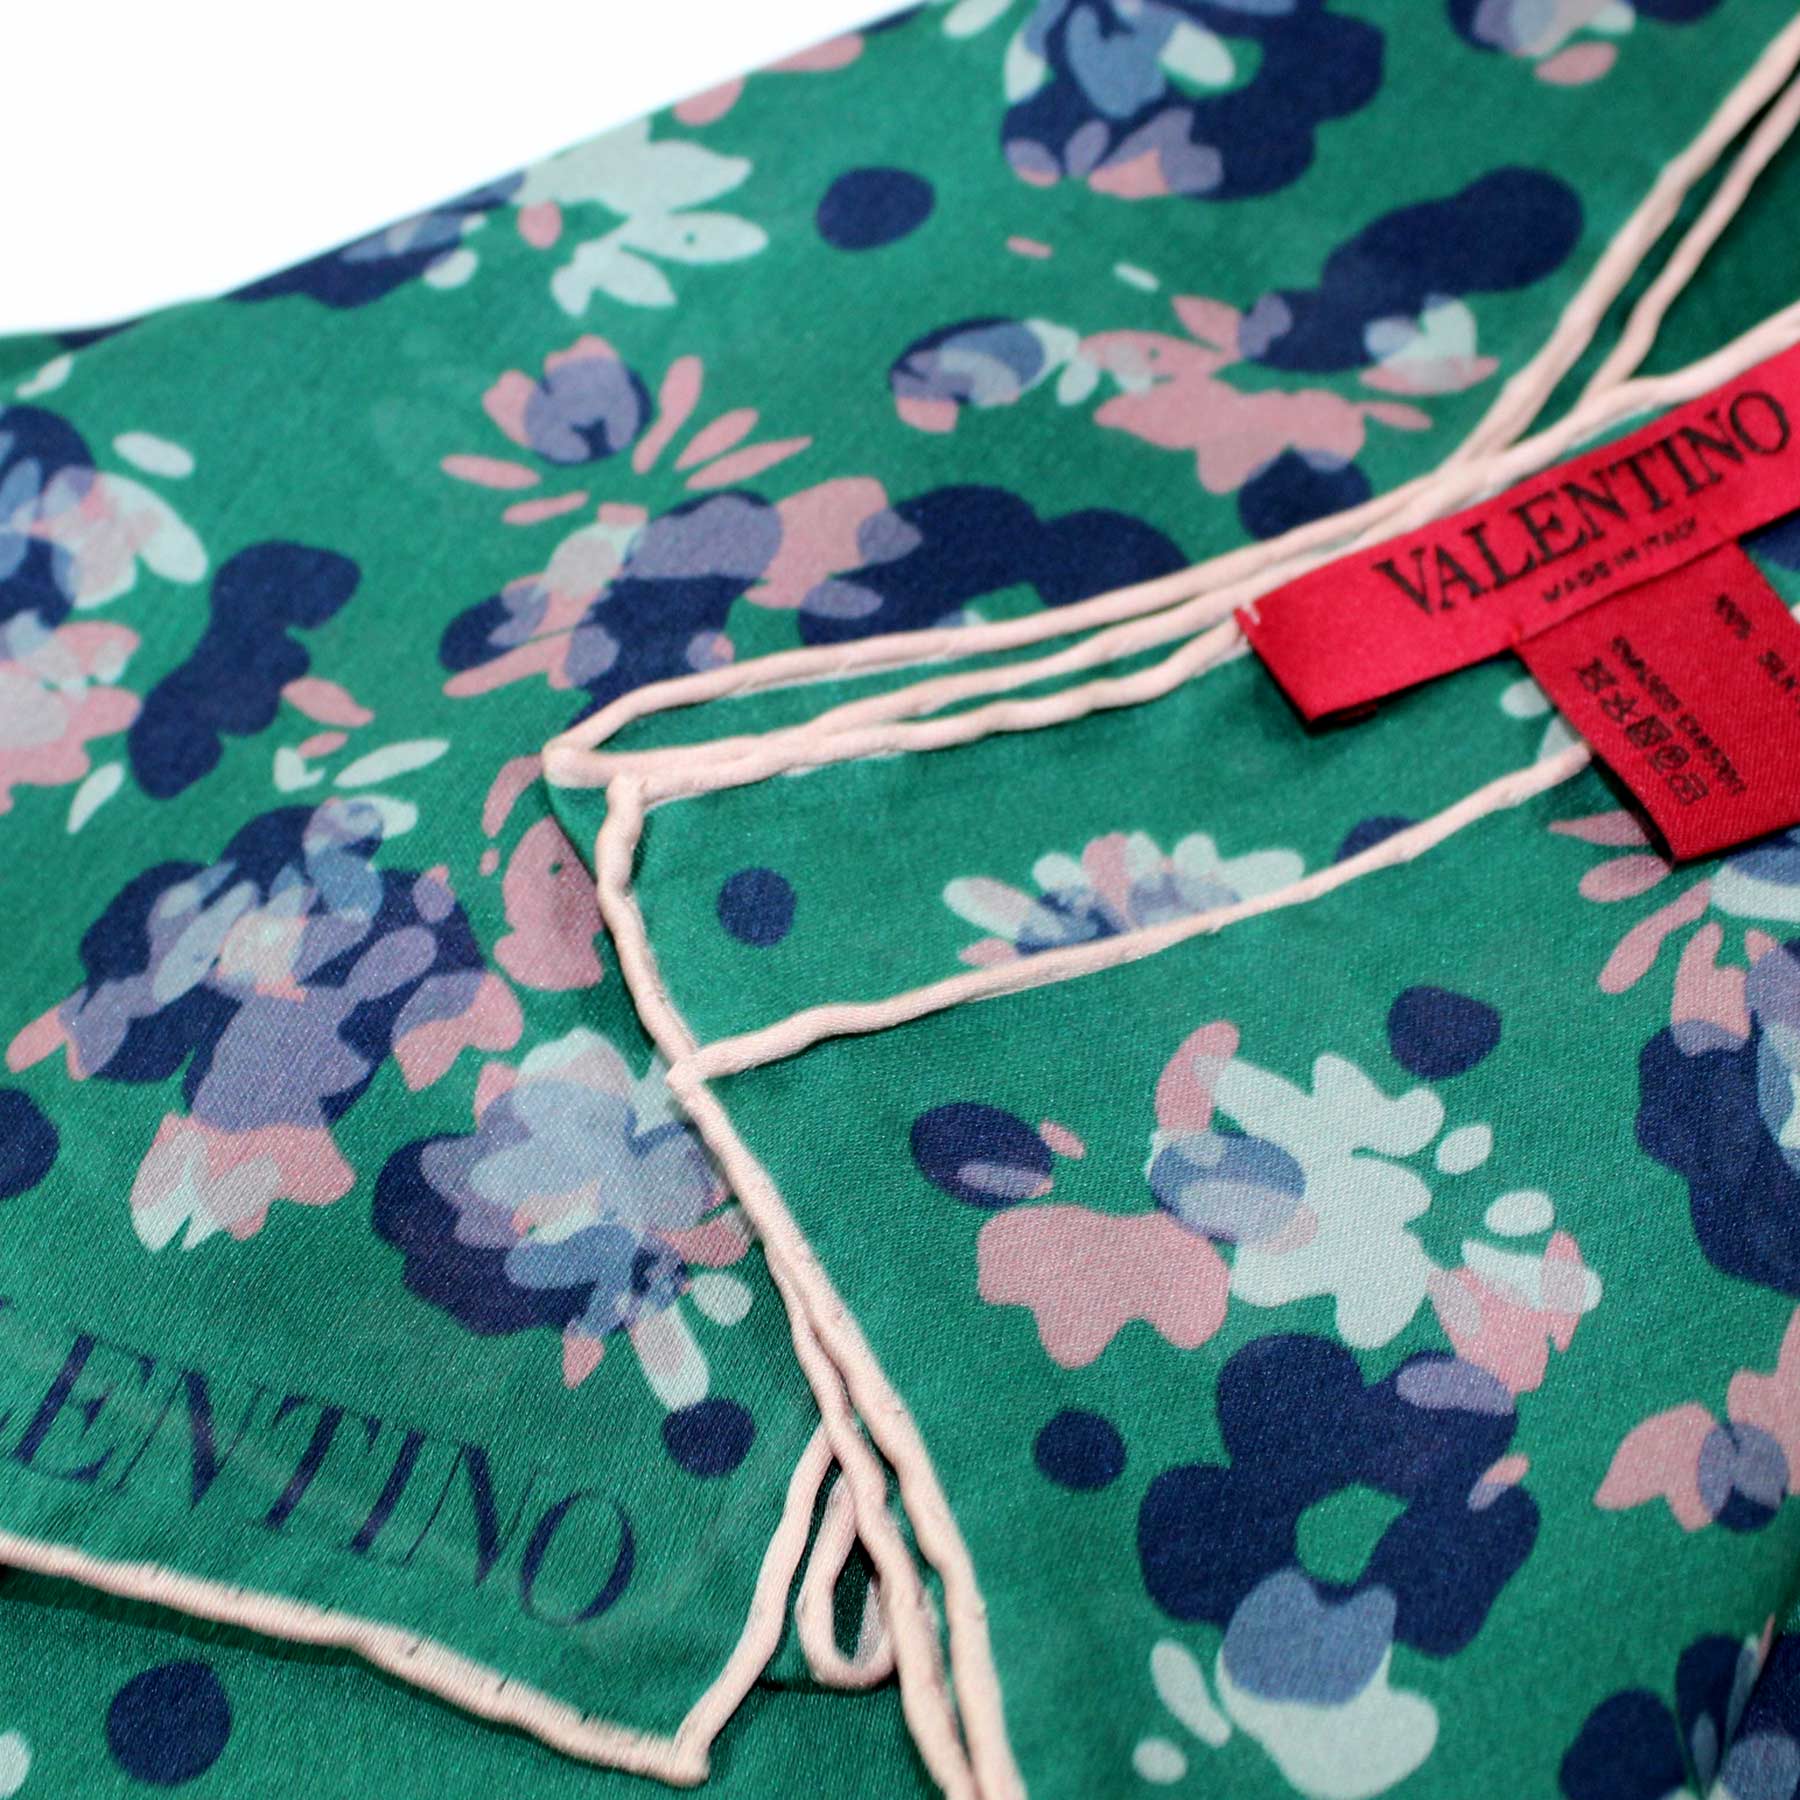 Valentino Scarf Green Plum Pink Floral New